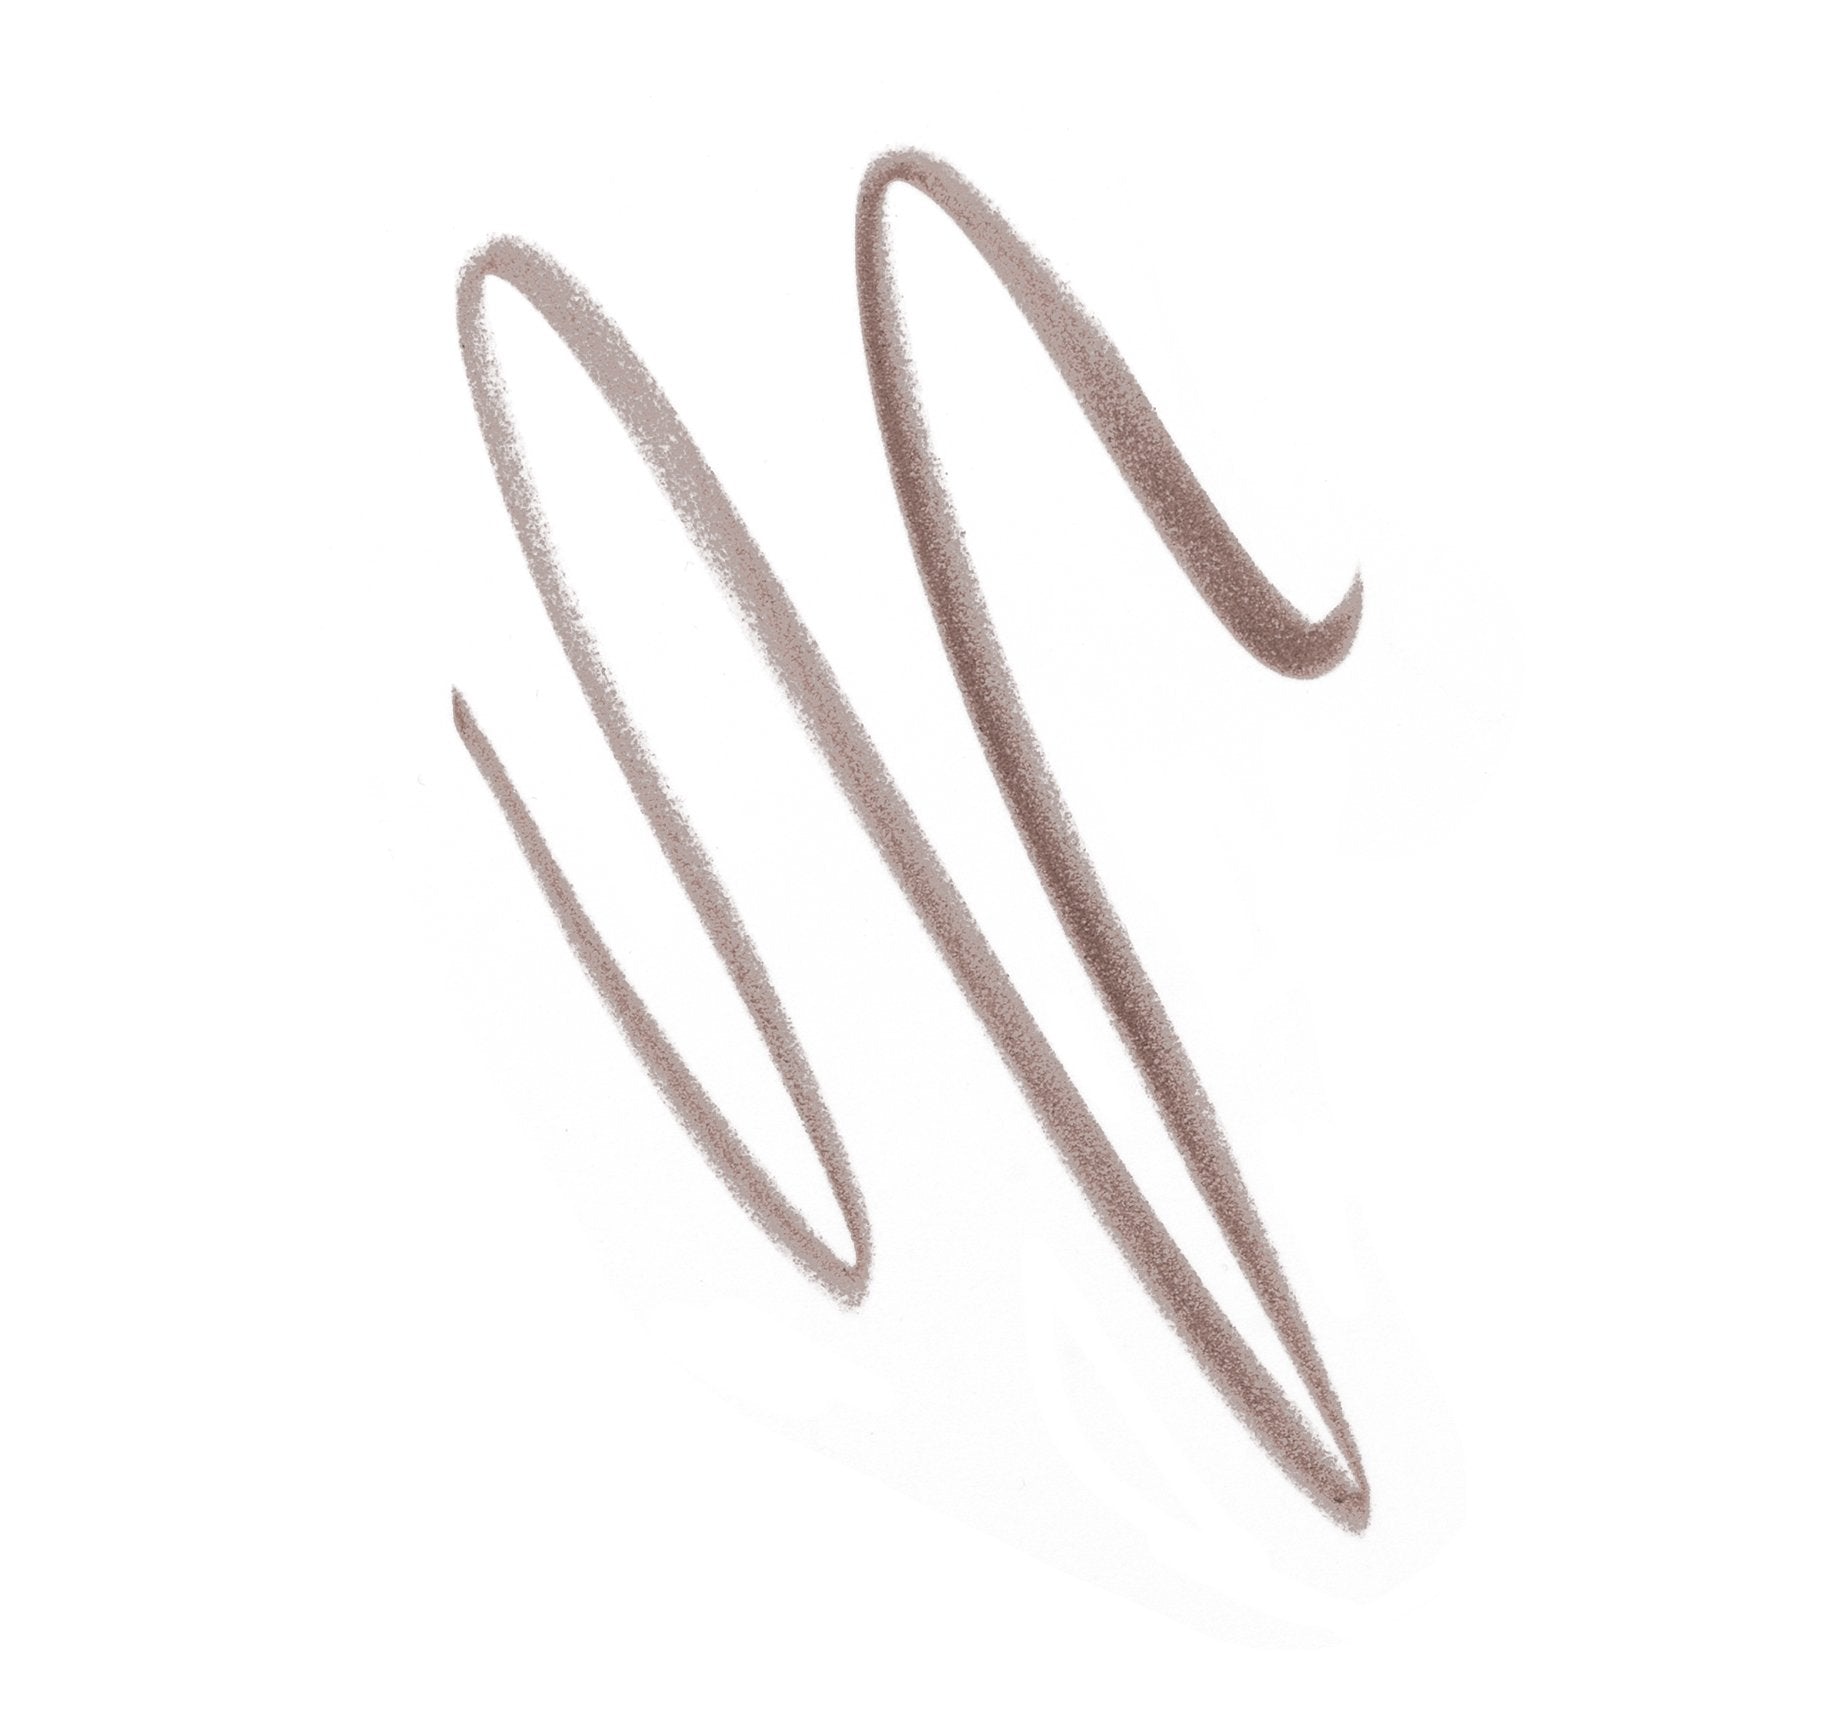 Definer Dual-Ended Brow Pencil & Spoolie - Chocolate Mousse - Image 10